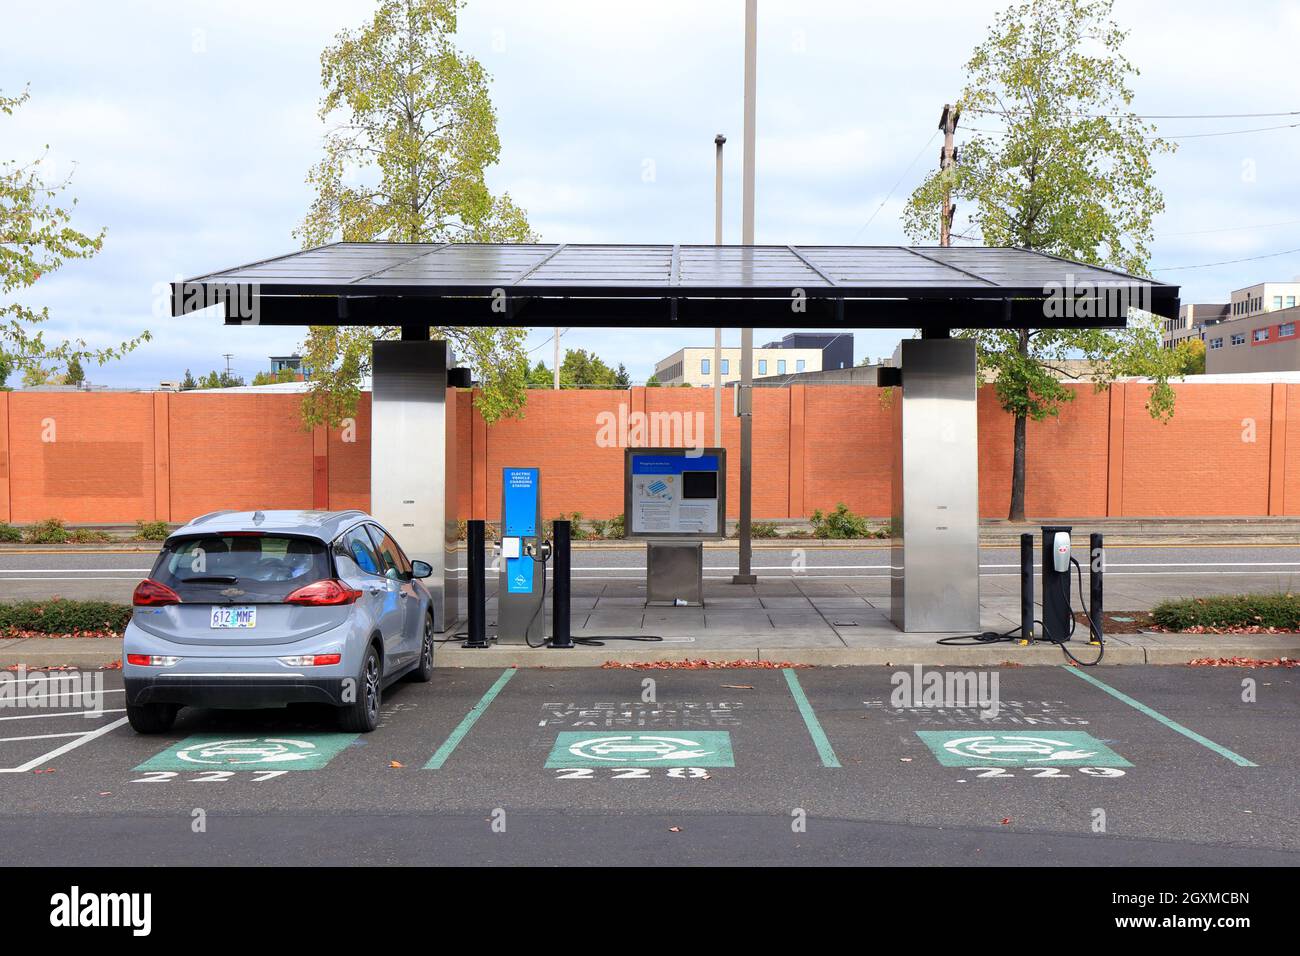 A solar canopy electric vehicle charging station with ebike battery charging lockers Stock Photo